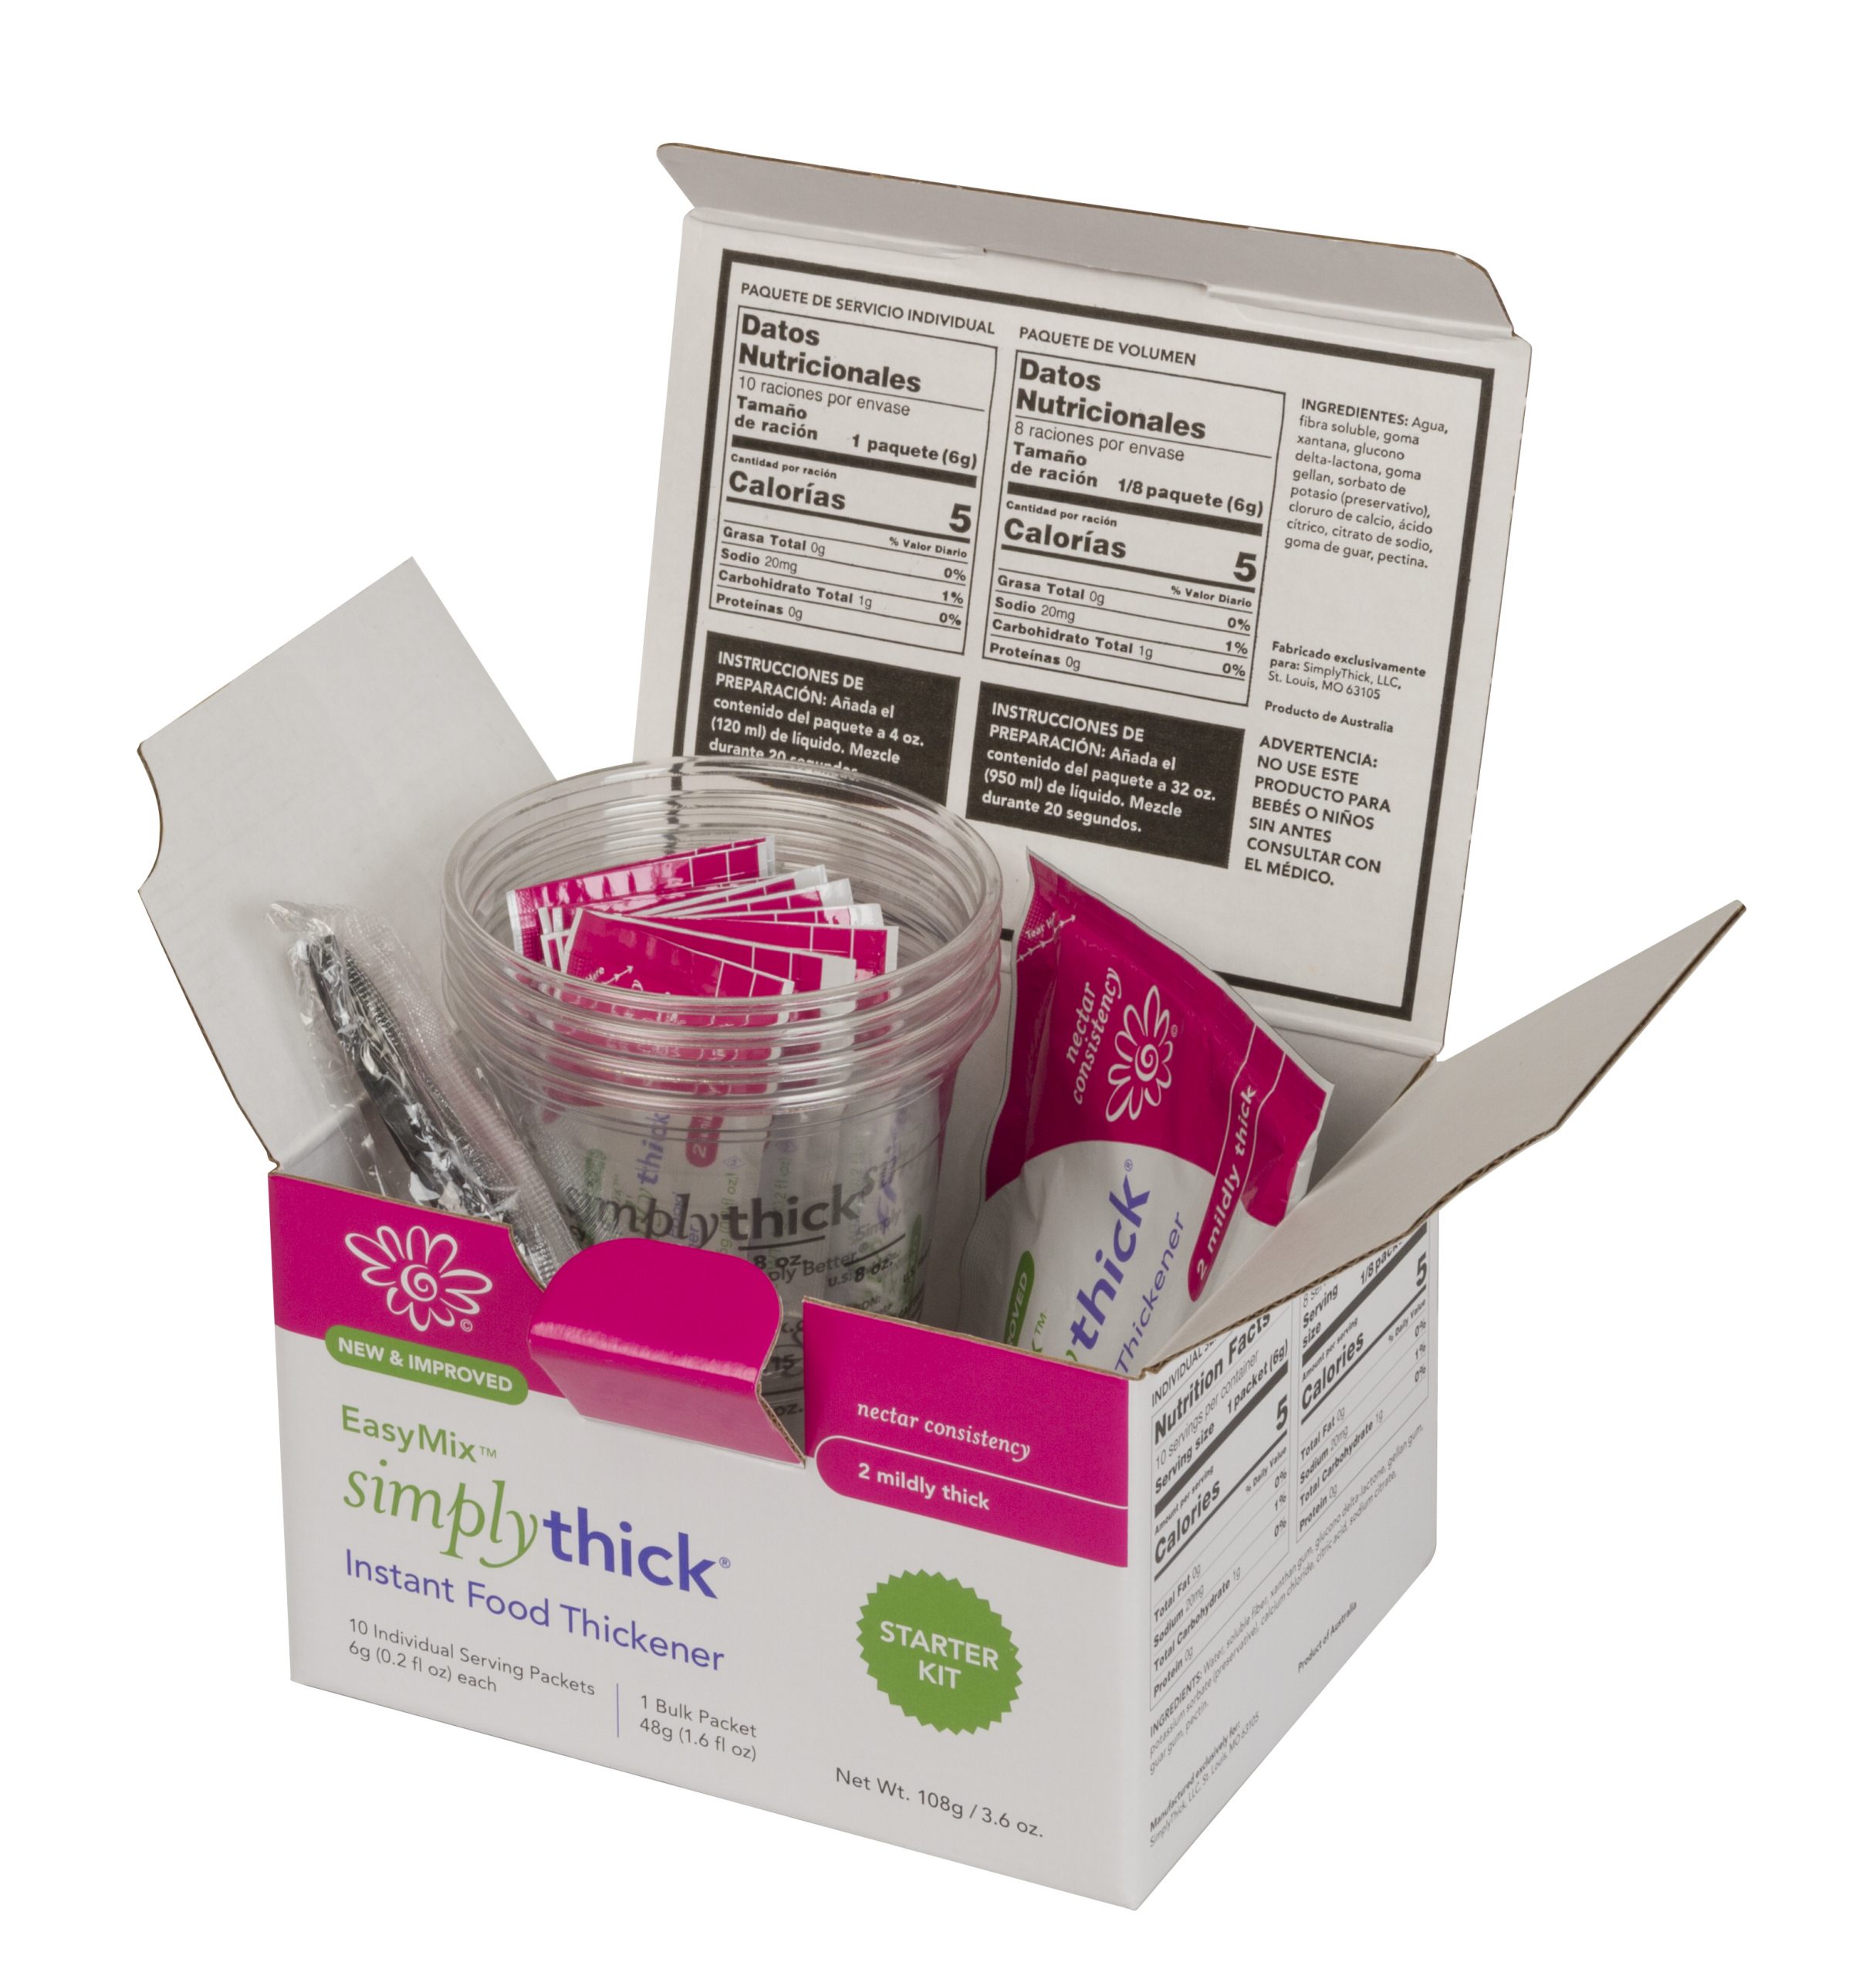 Buy Simply Thick Instant Food Thickeners at Medical Monks!